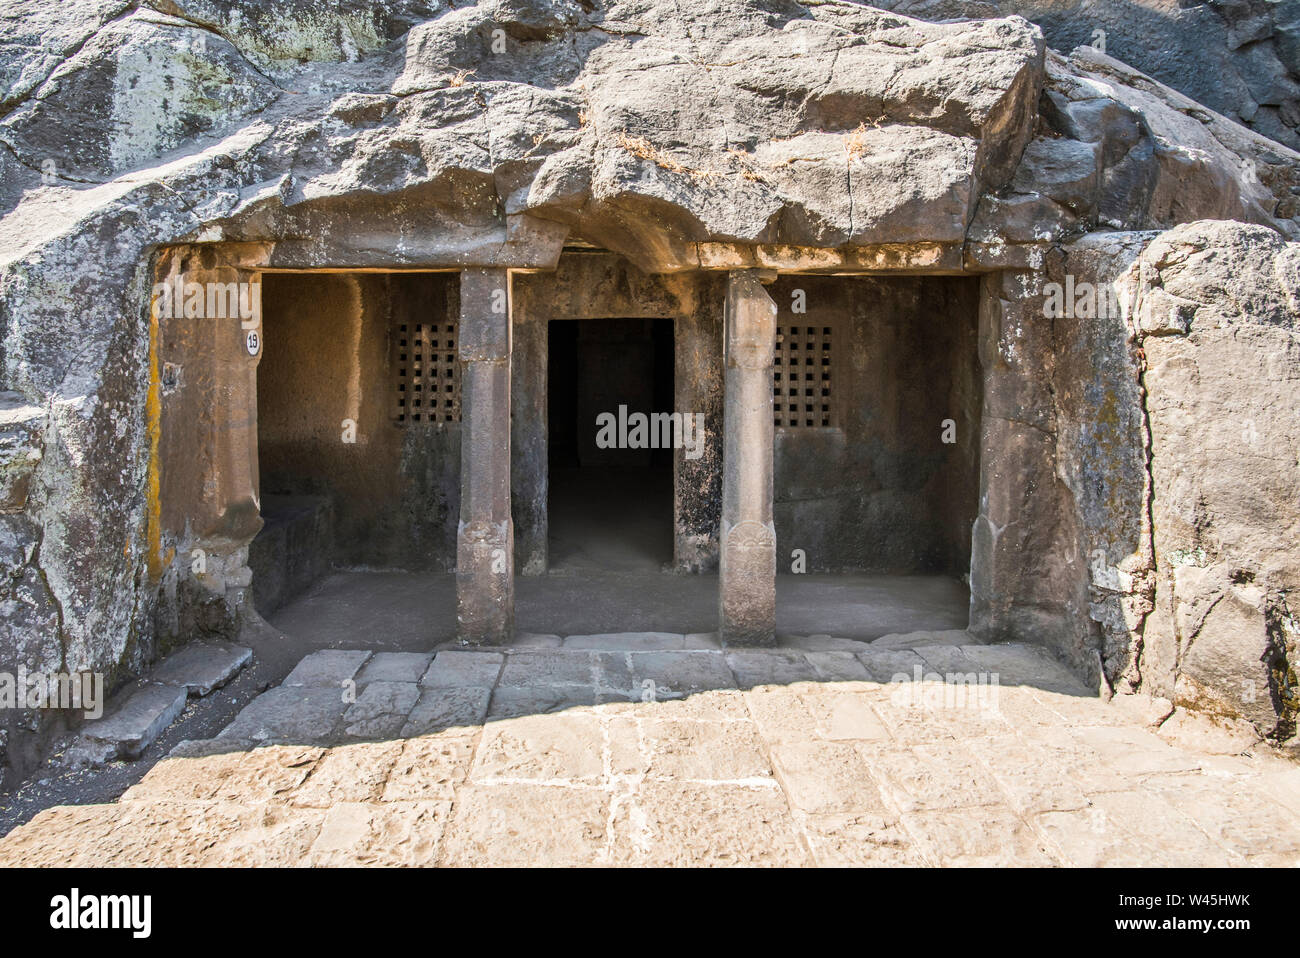 Cave 19, General view showing two simple slender pillars and perforated windows, Nasik, Maharashtra. Stock Photo